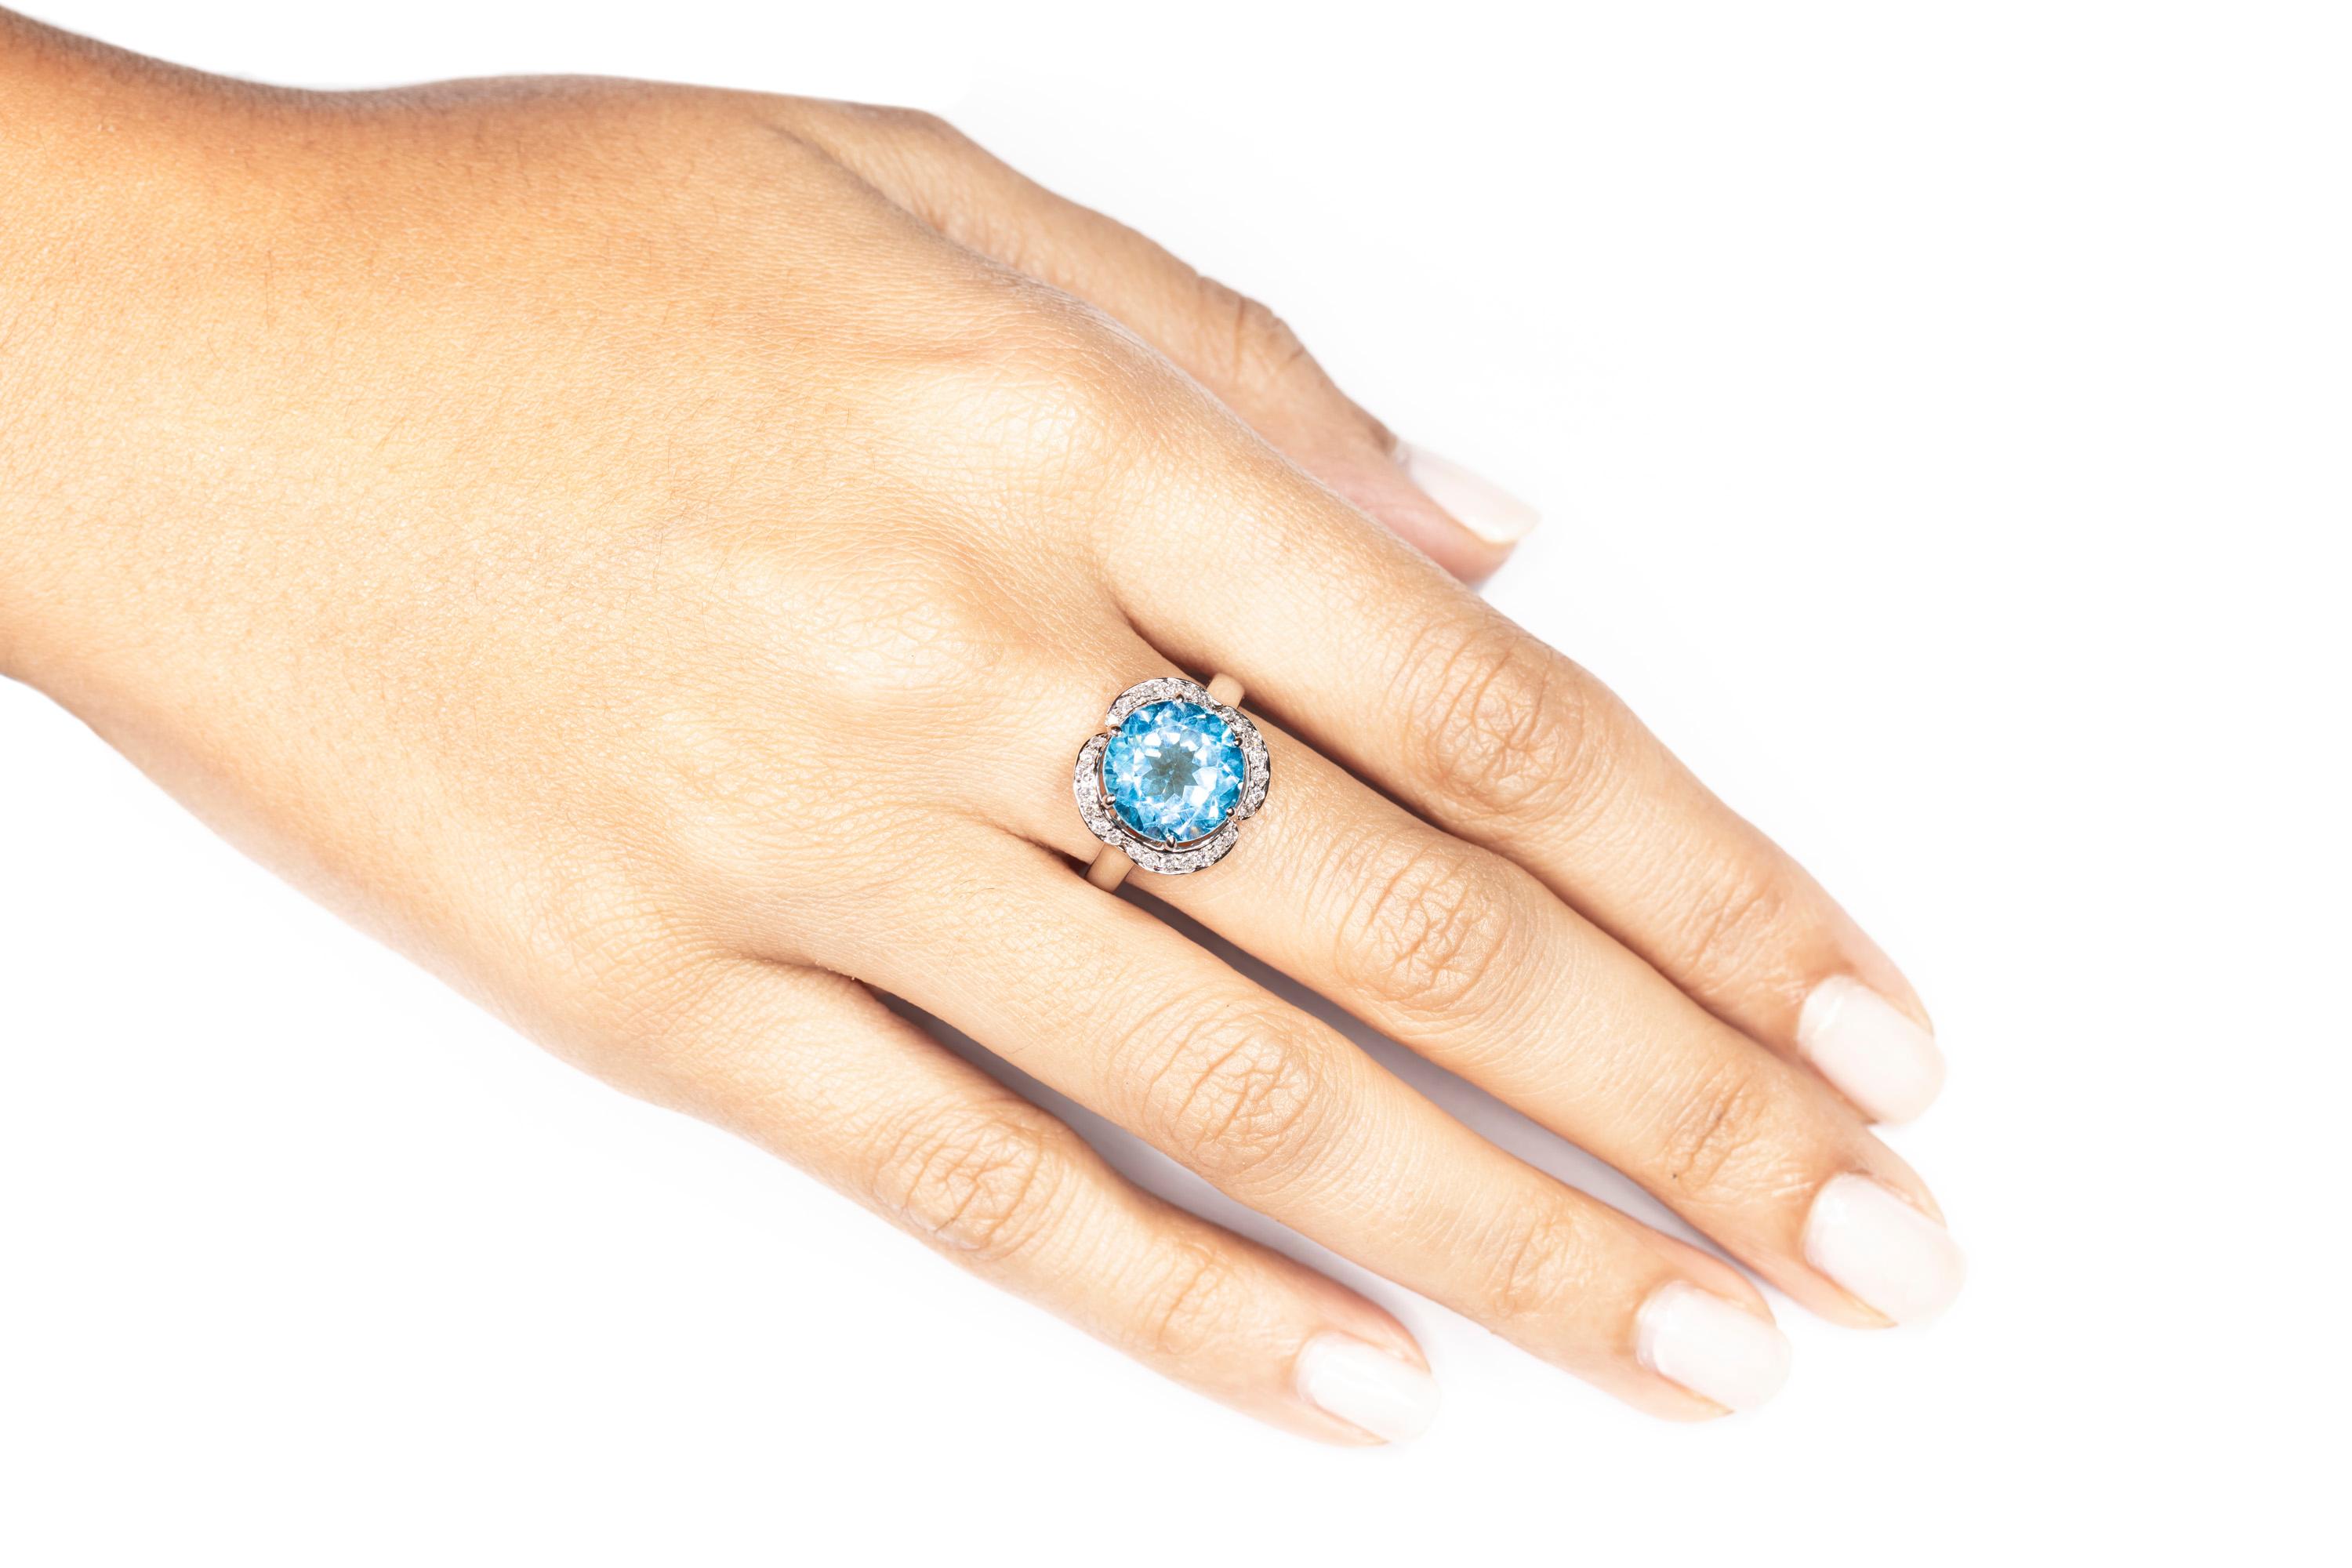 Butani's cocktail ring will carry you from occasion to event.  The ring features a center 5.88 carat round blue topaz surrounded by a halo of 0.29 carats of round brilliant-cut diamonds.  Currently a ring size US 7.  For other sizes, please contact